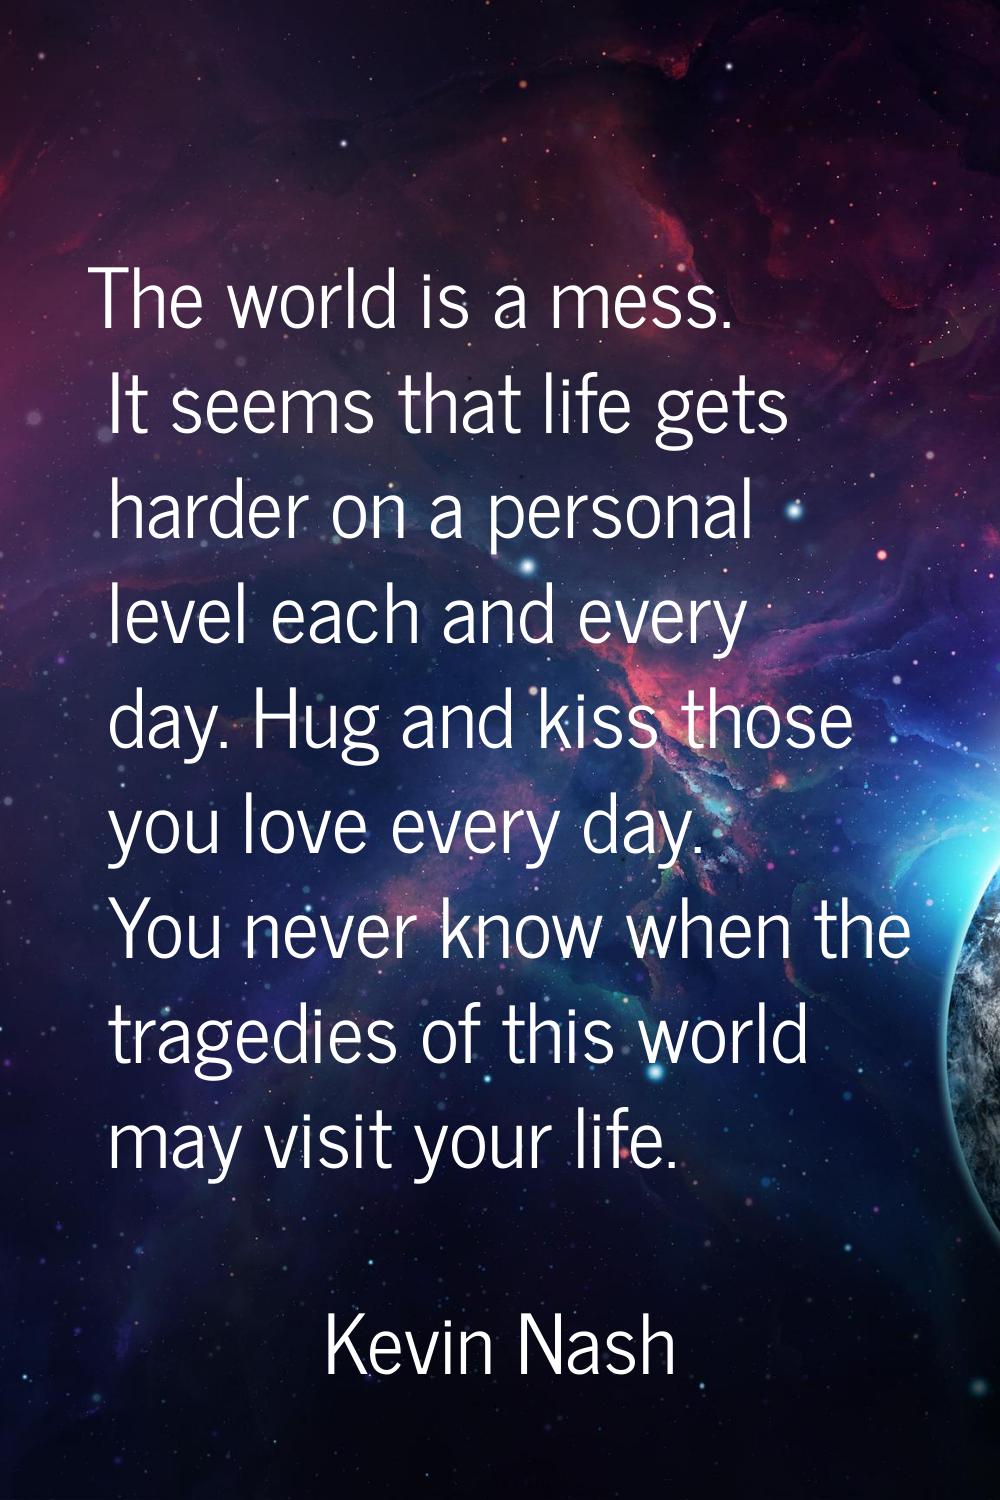 The world is a mess. It seems that life gets harder on a personal level each and every day. Hug and